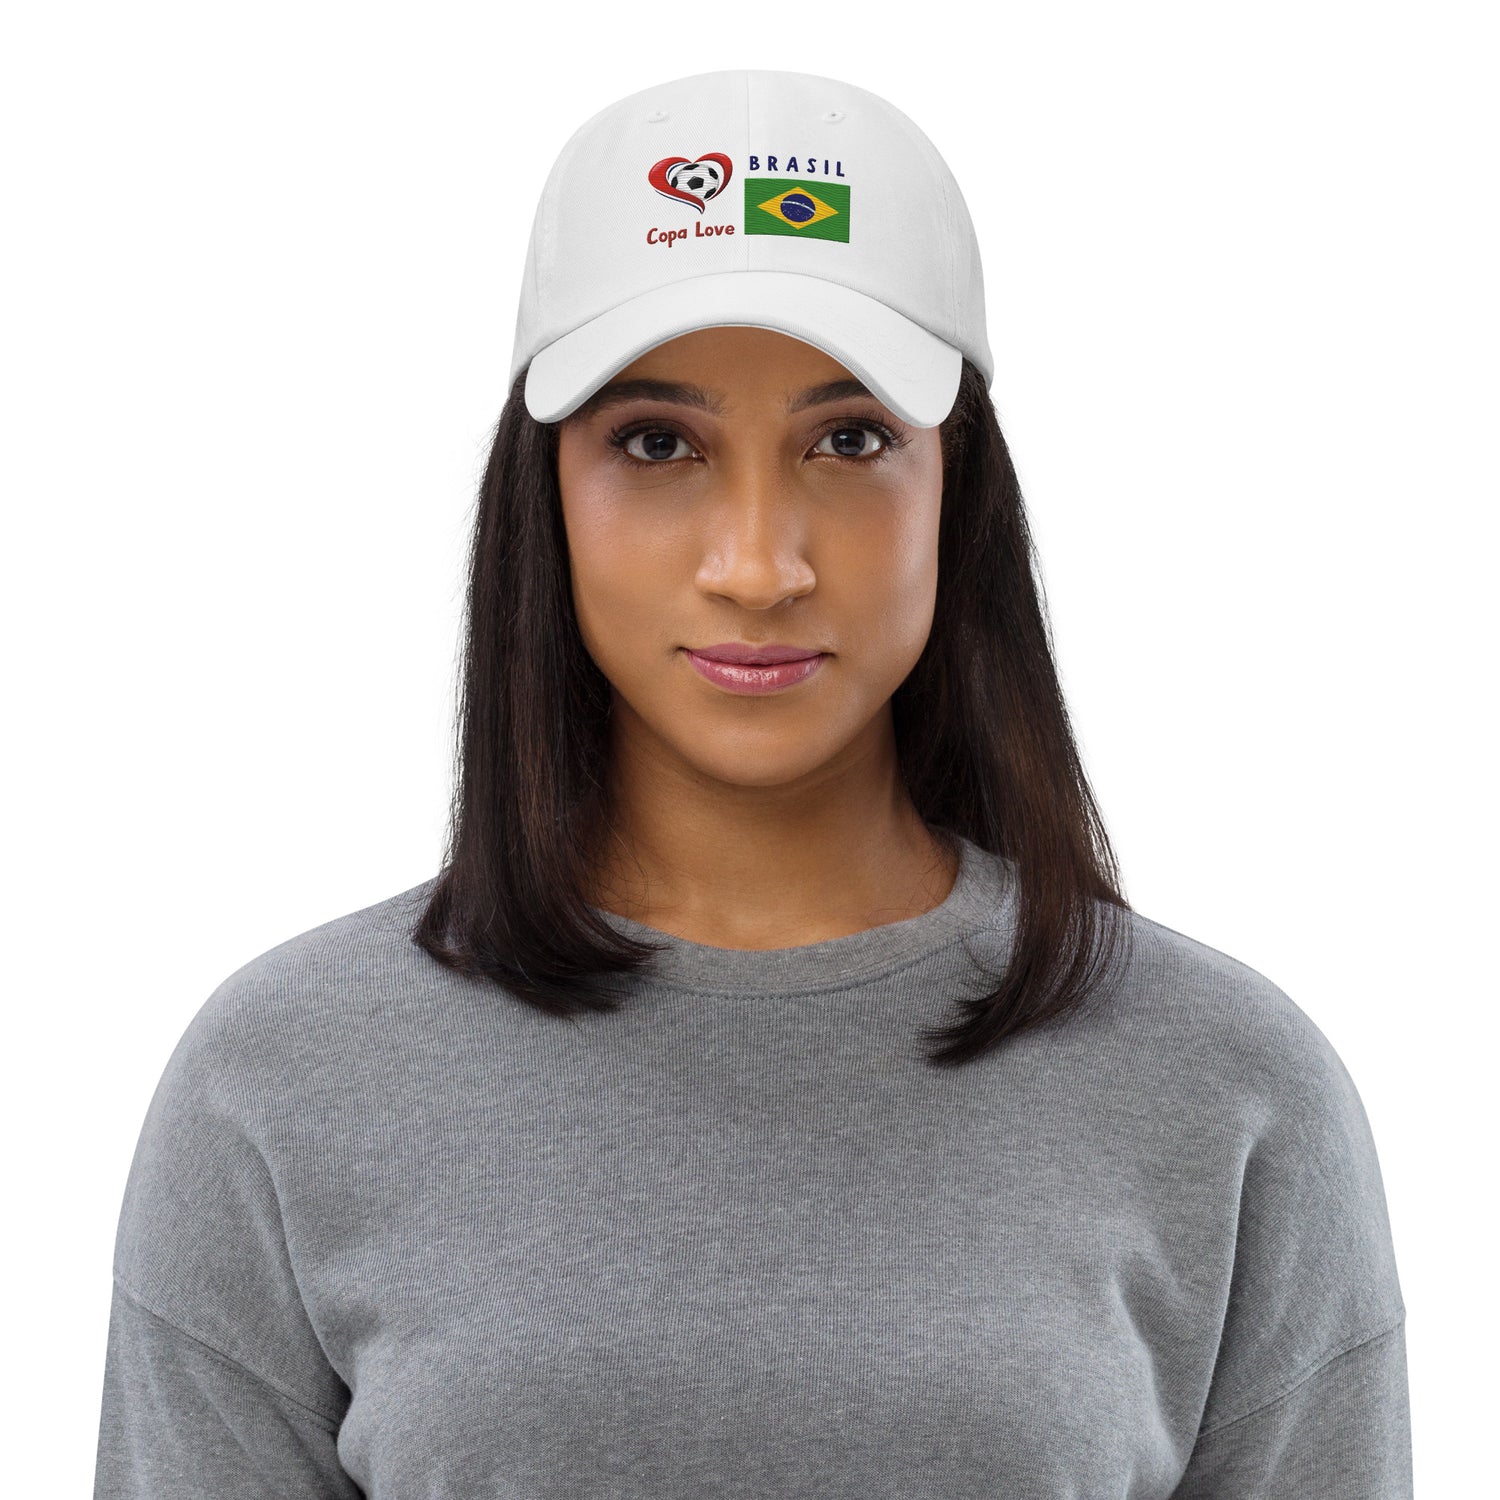 BRASIL - Limited Edition Copa Love Dad Hat